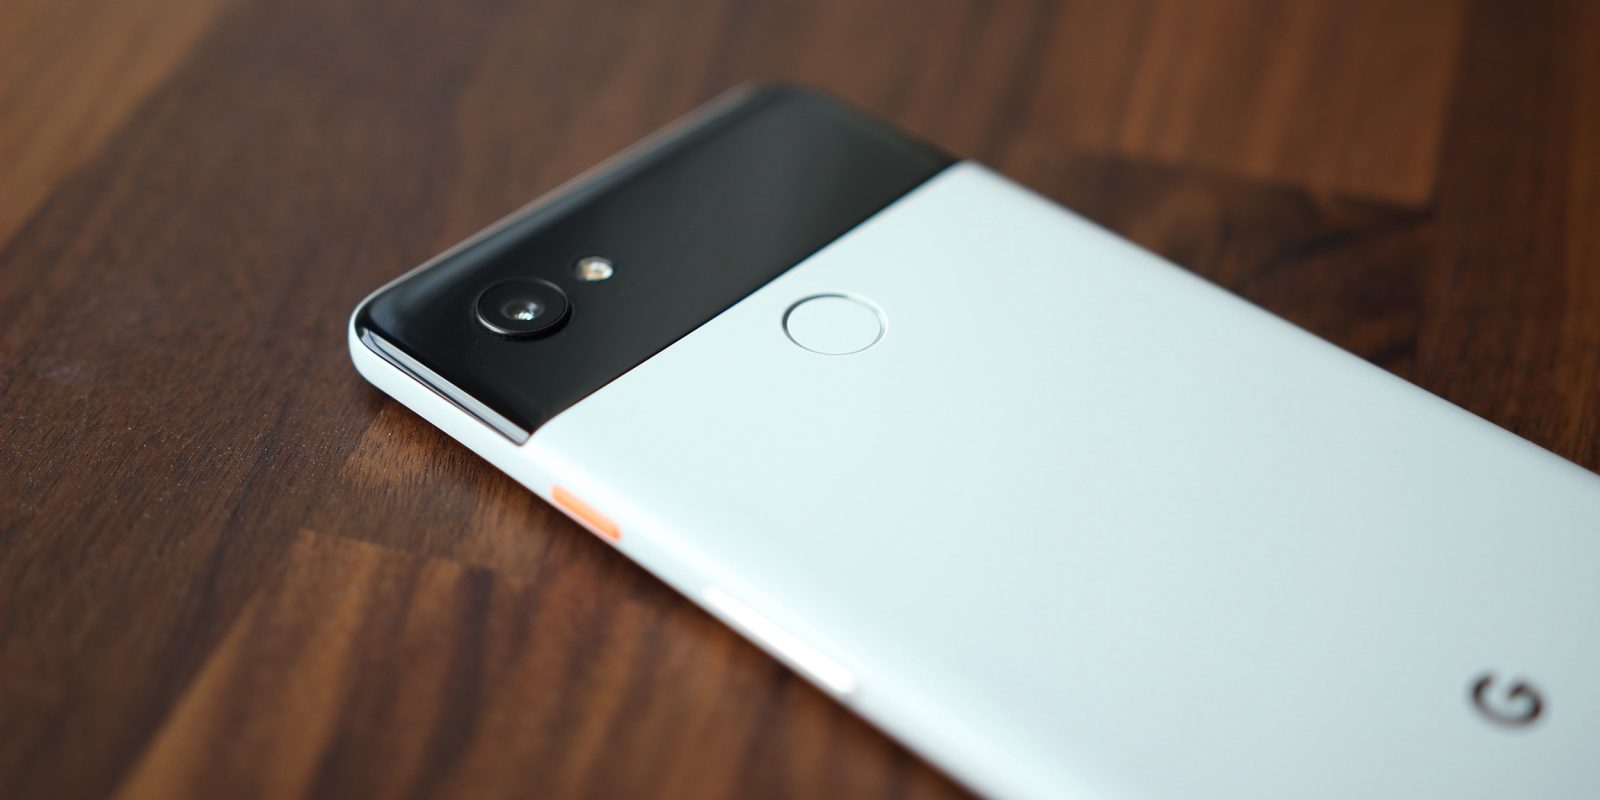 Foxconn Is Manufacturing Google Pixel 3, Not HTC